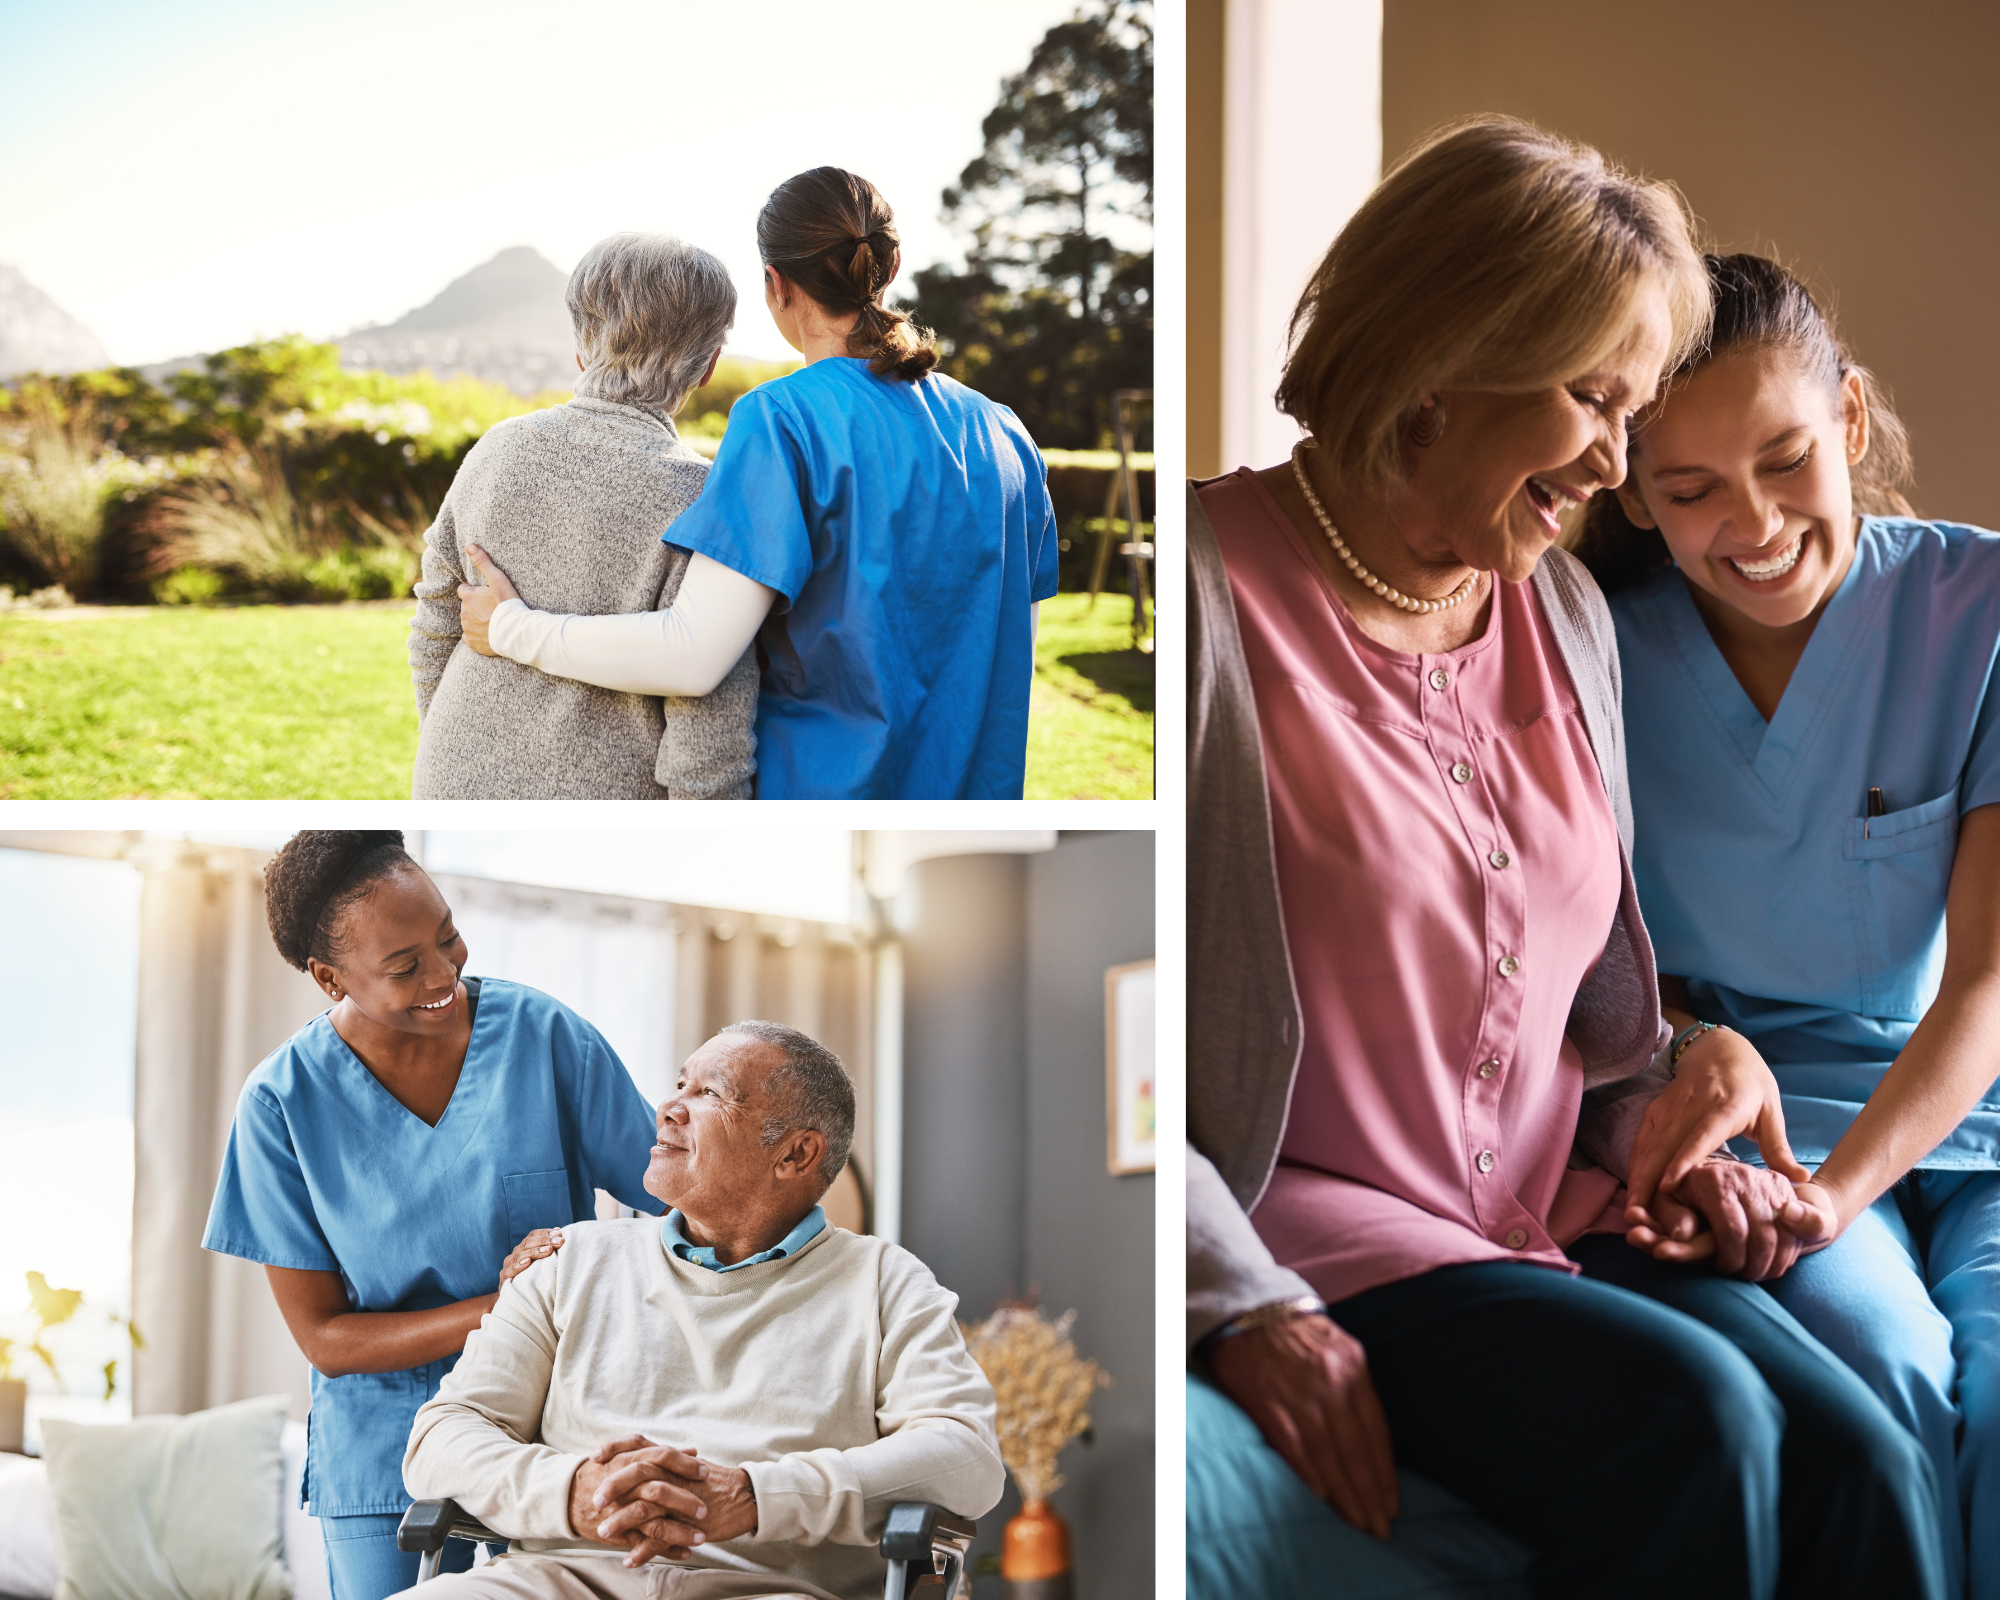 There are many benefits to becoming a caregiver